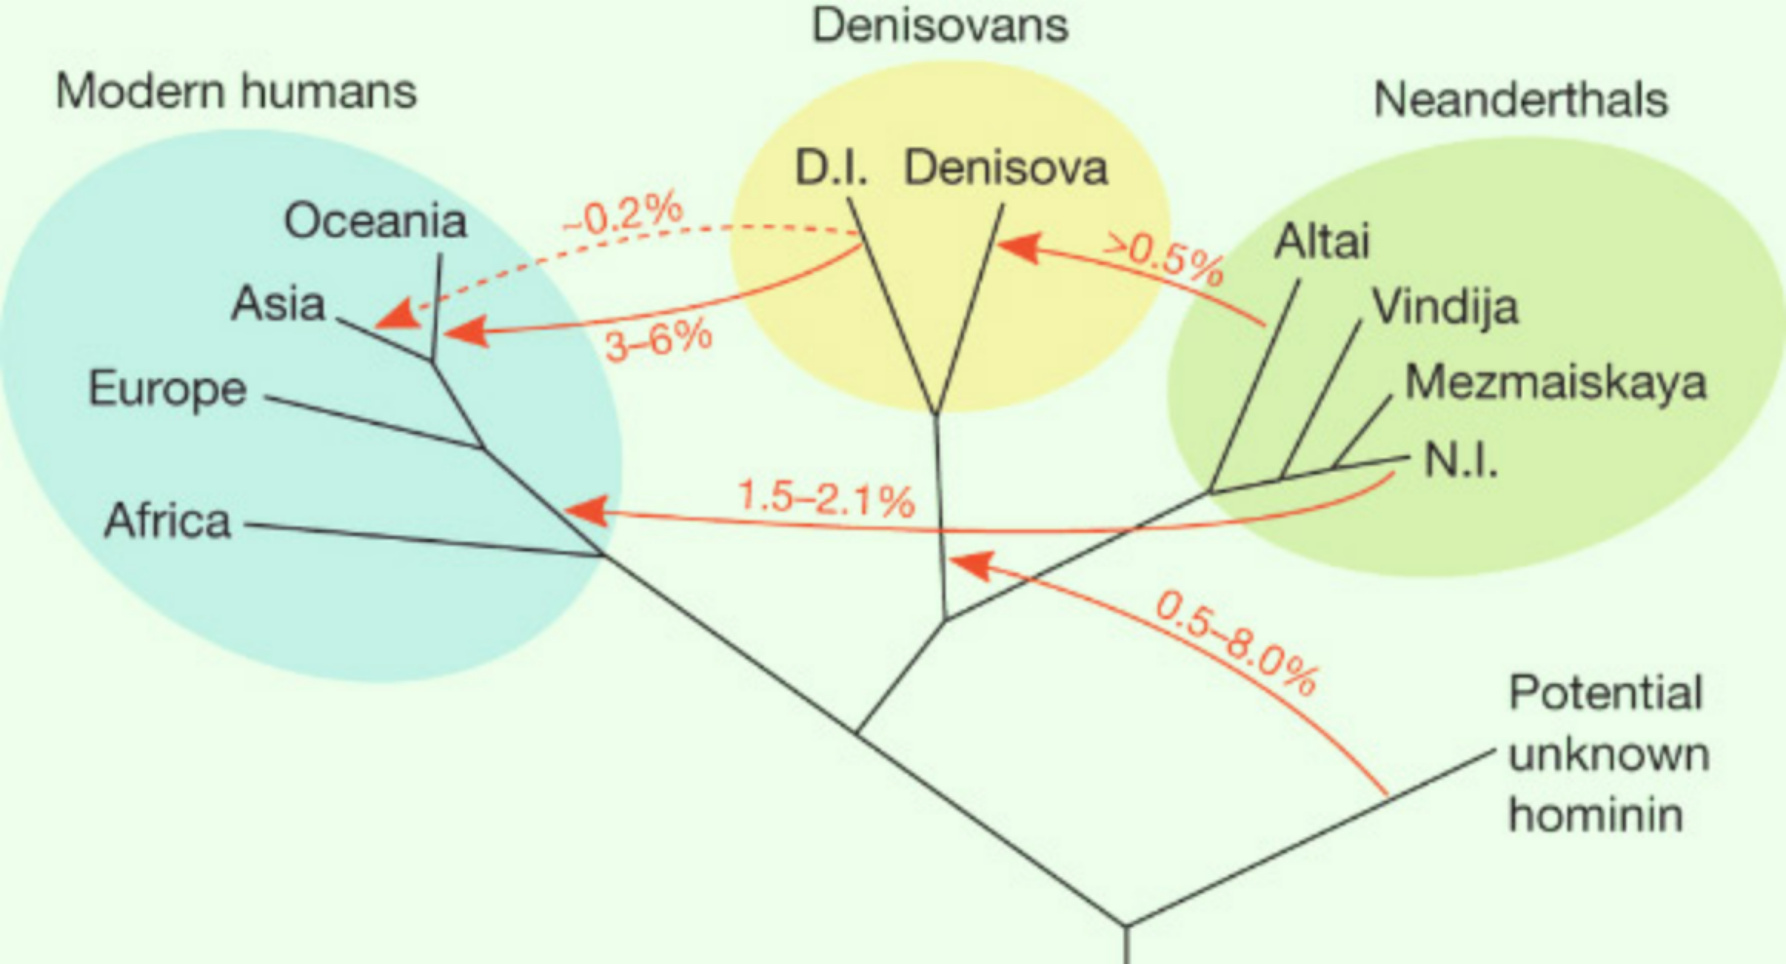 Family tree of early humans that may have lived in Eurasia more than 50,000 years ago.